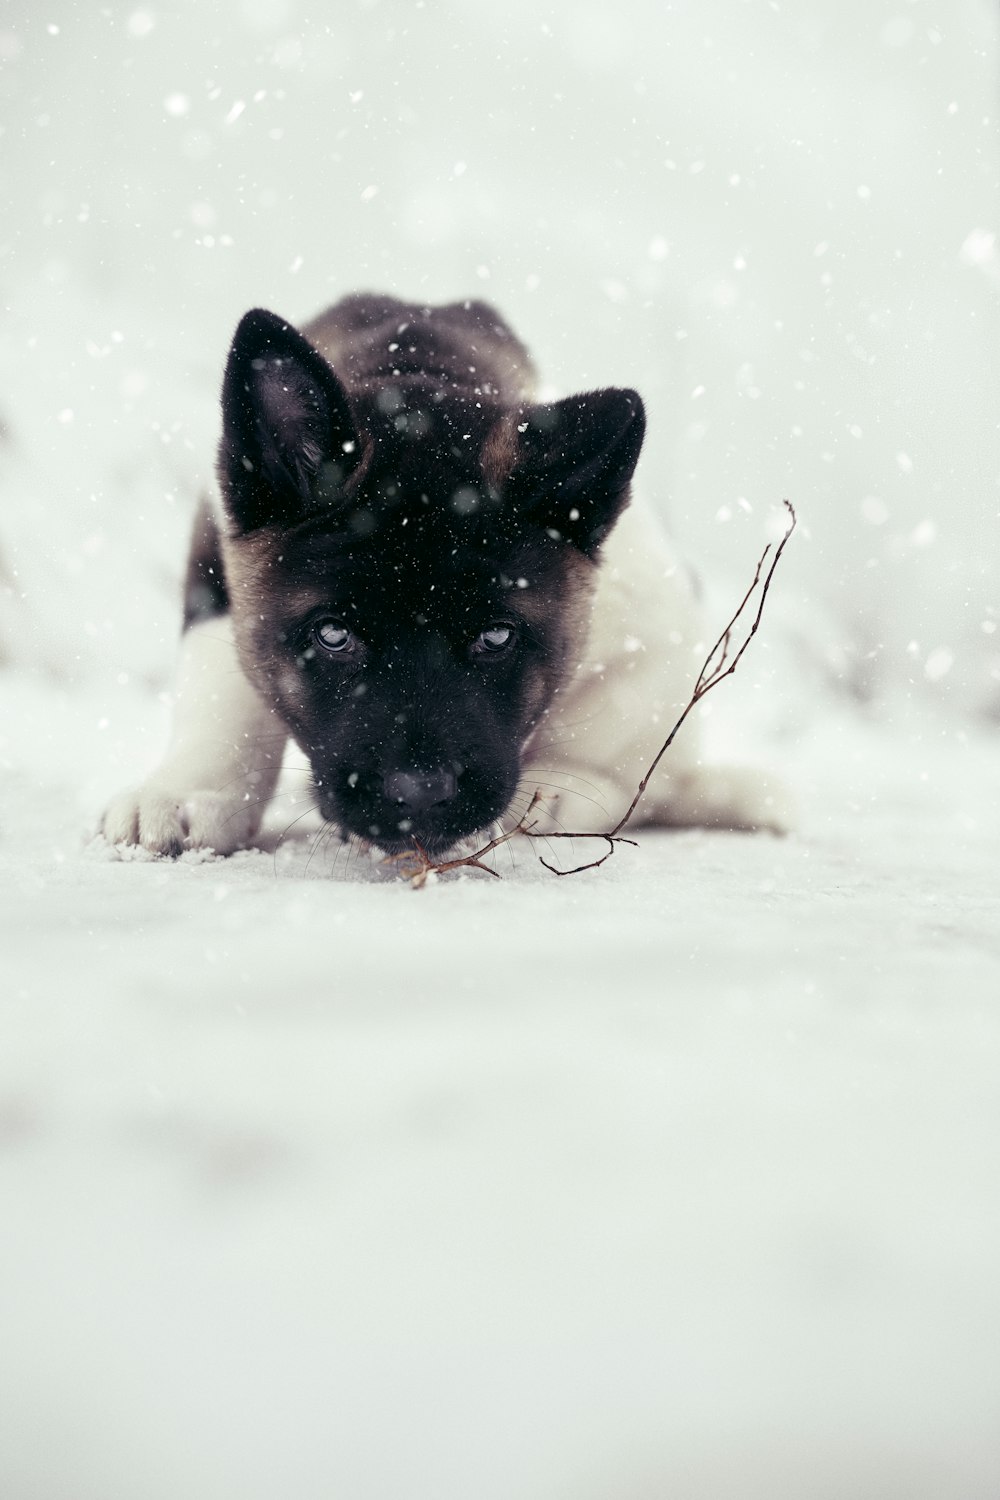 brown and black german shepherd puppy lying on snow covered ground during daytime